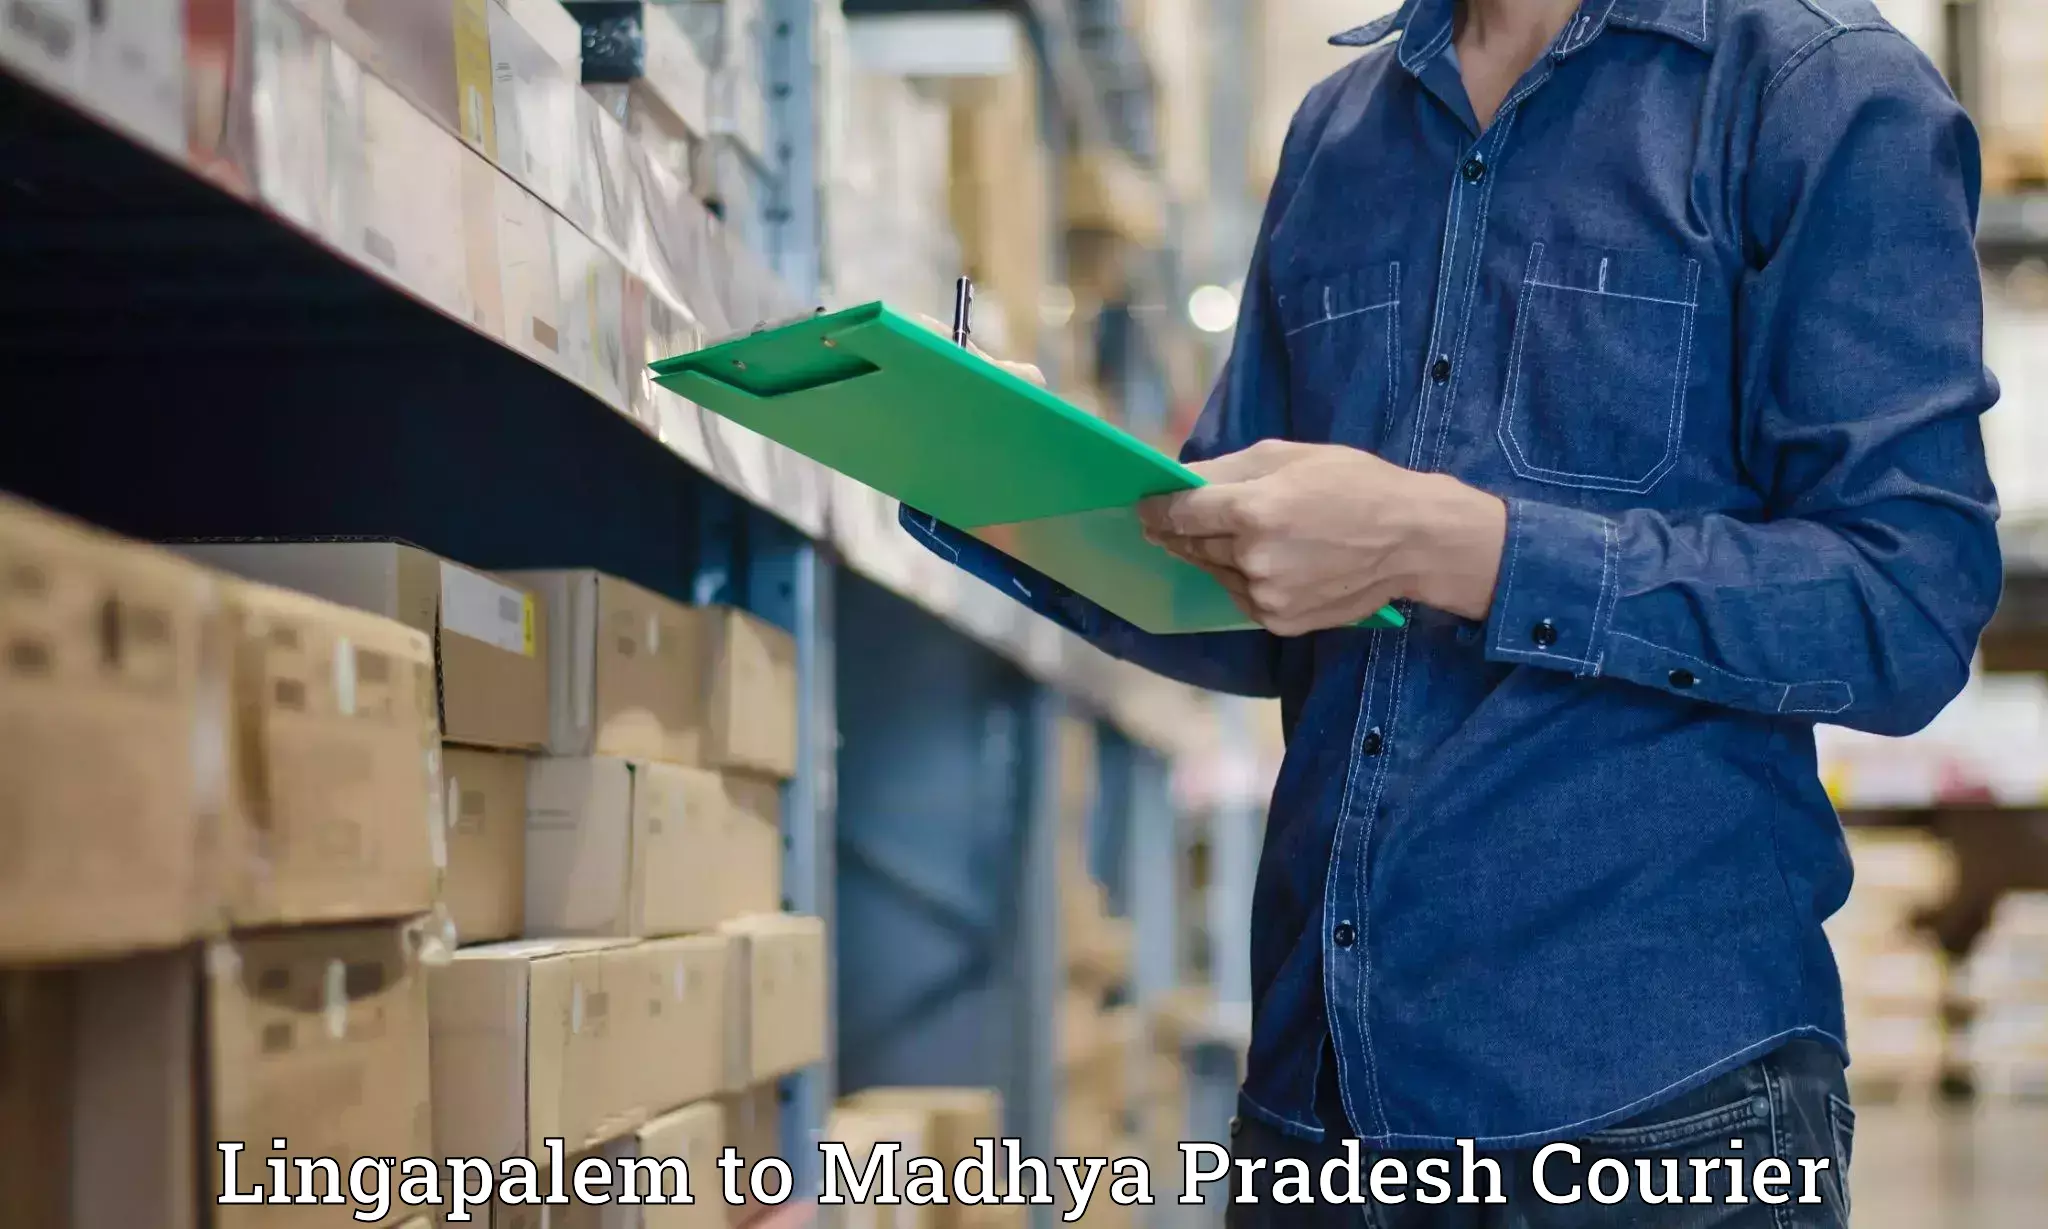 Reliable parcel services Lingapalem to Madhya Pradesh